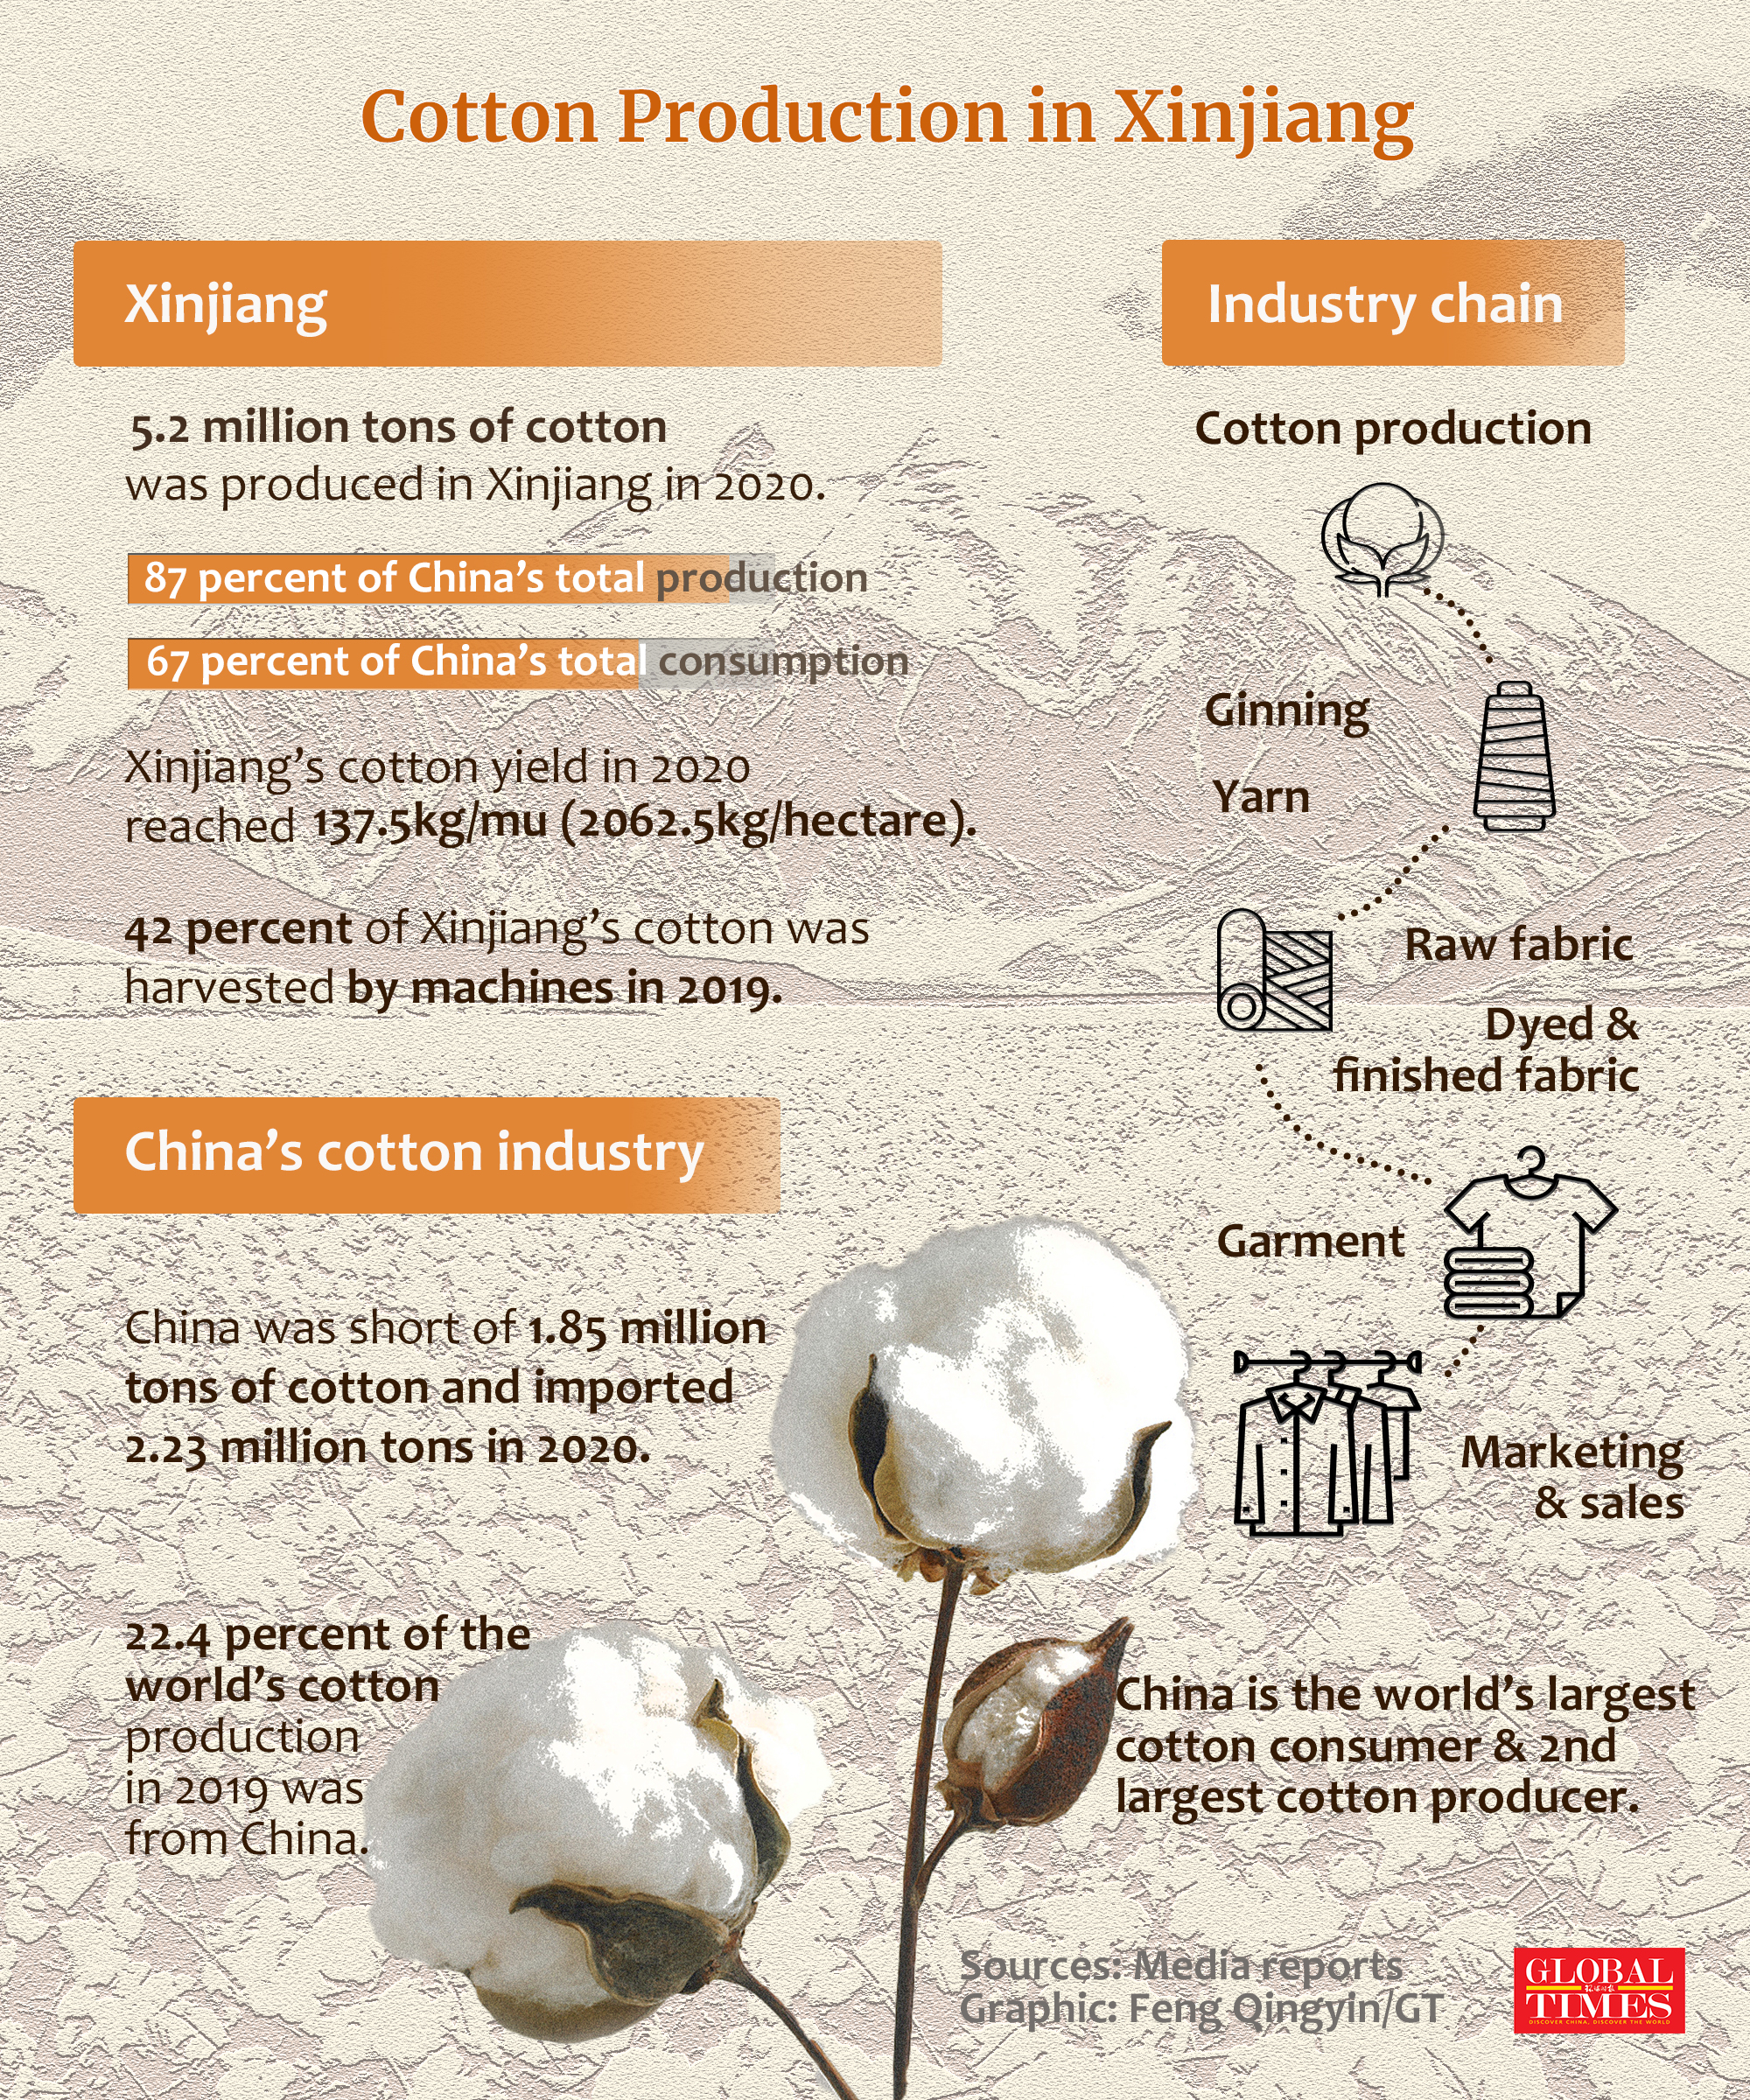 Key figures about #XinjiangCotton:
- Cotton produced in Xinjiang makes up 87% of China’s total production
- 42% of cotton was harvested by machines in Xinjiang
- Nearly one-quarter of the world’s cotton production was from China 
